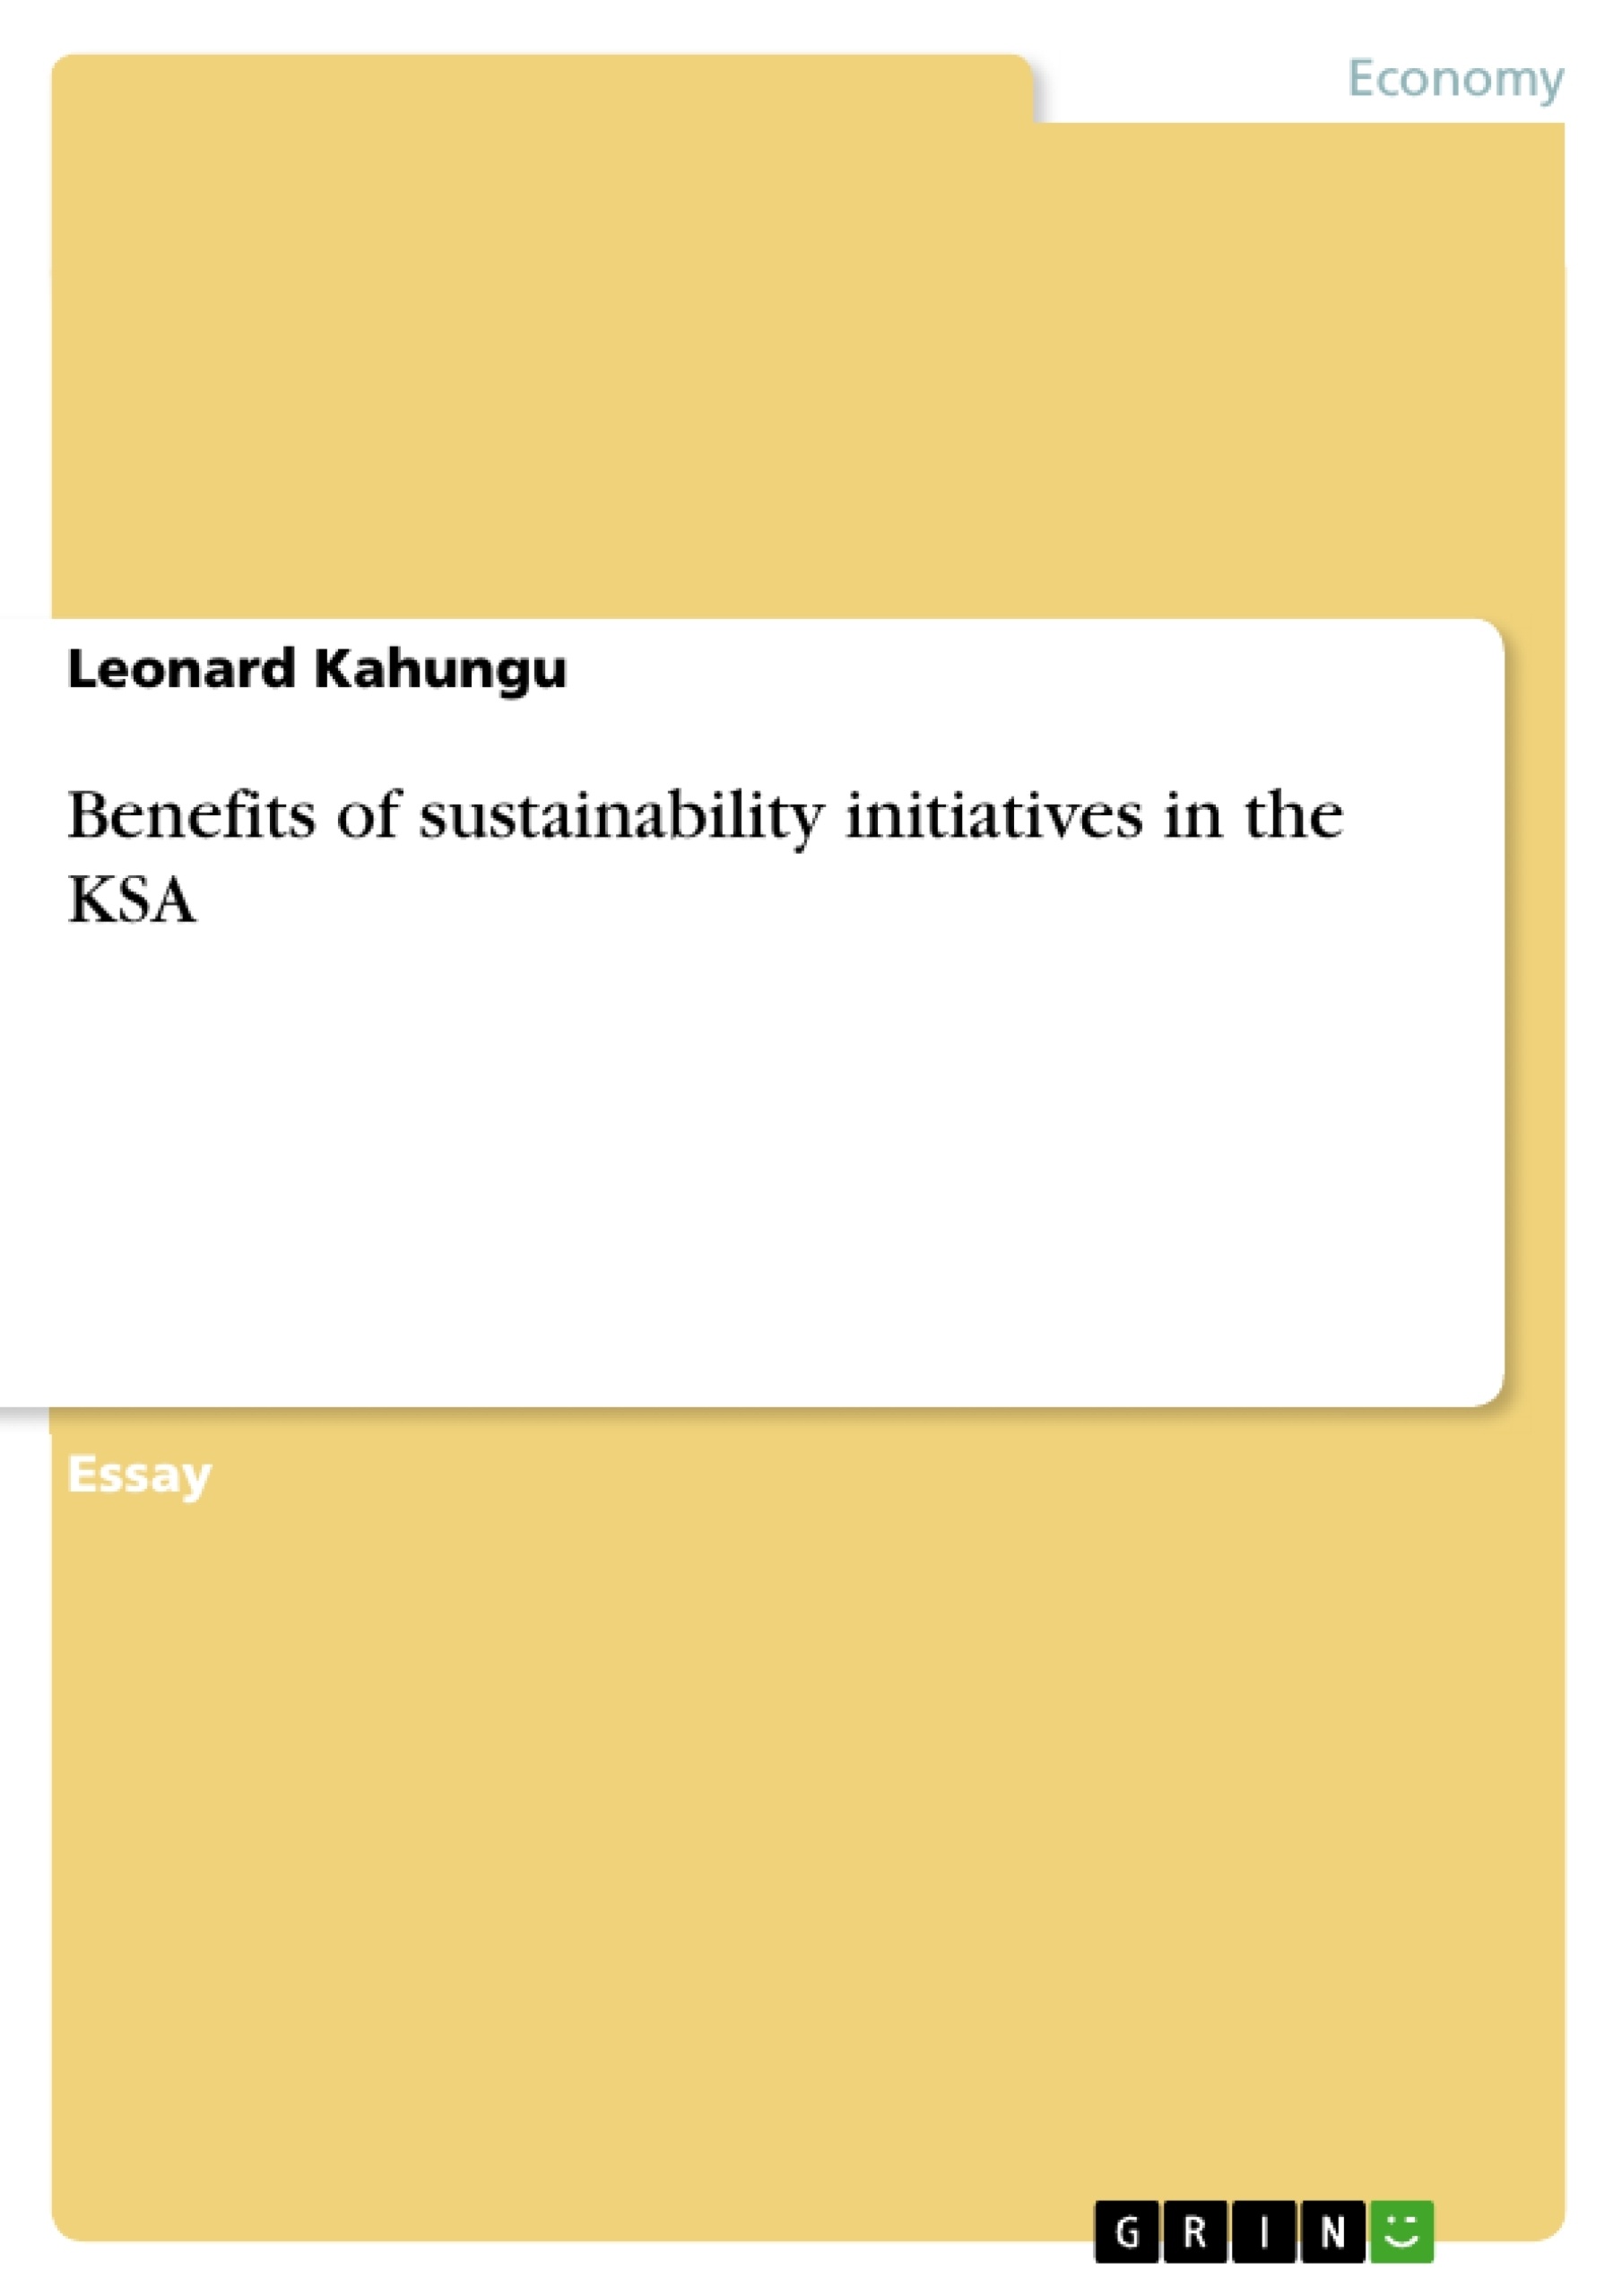 Title: Benefits of sustainability initiatives in the KSA